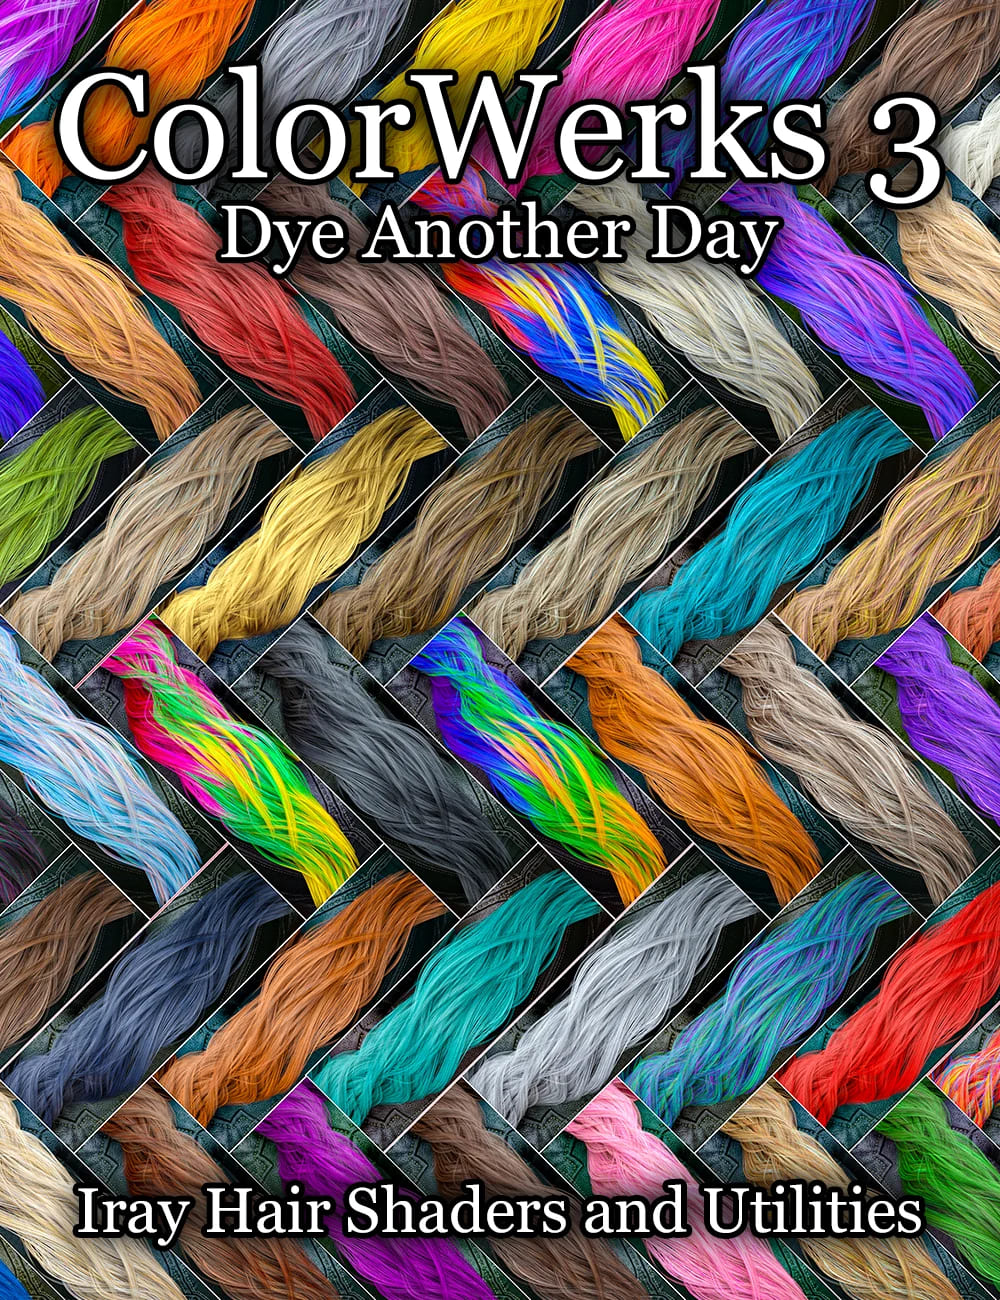 ColorWerks 3 Dye Another Day Iray Hair Shaders_DAZ3DDL